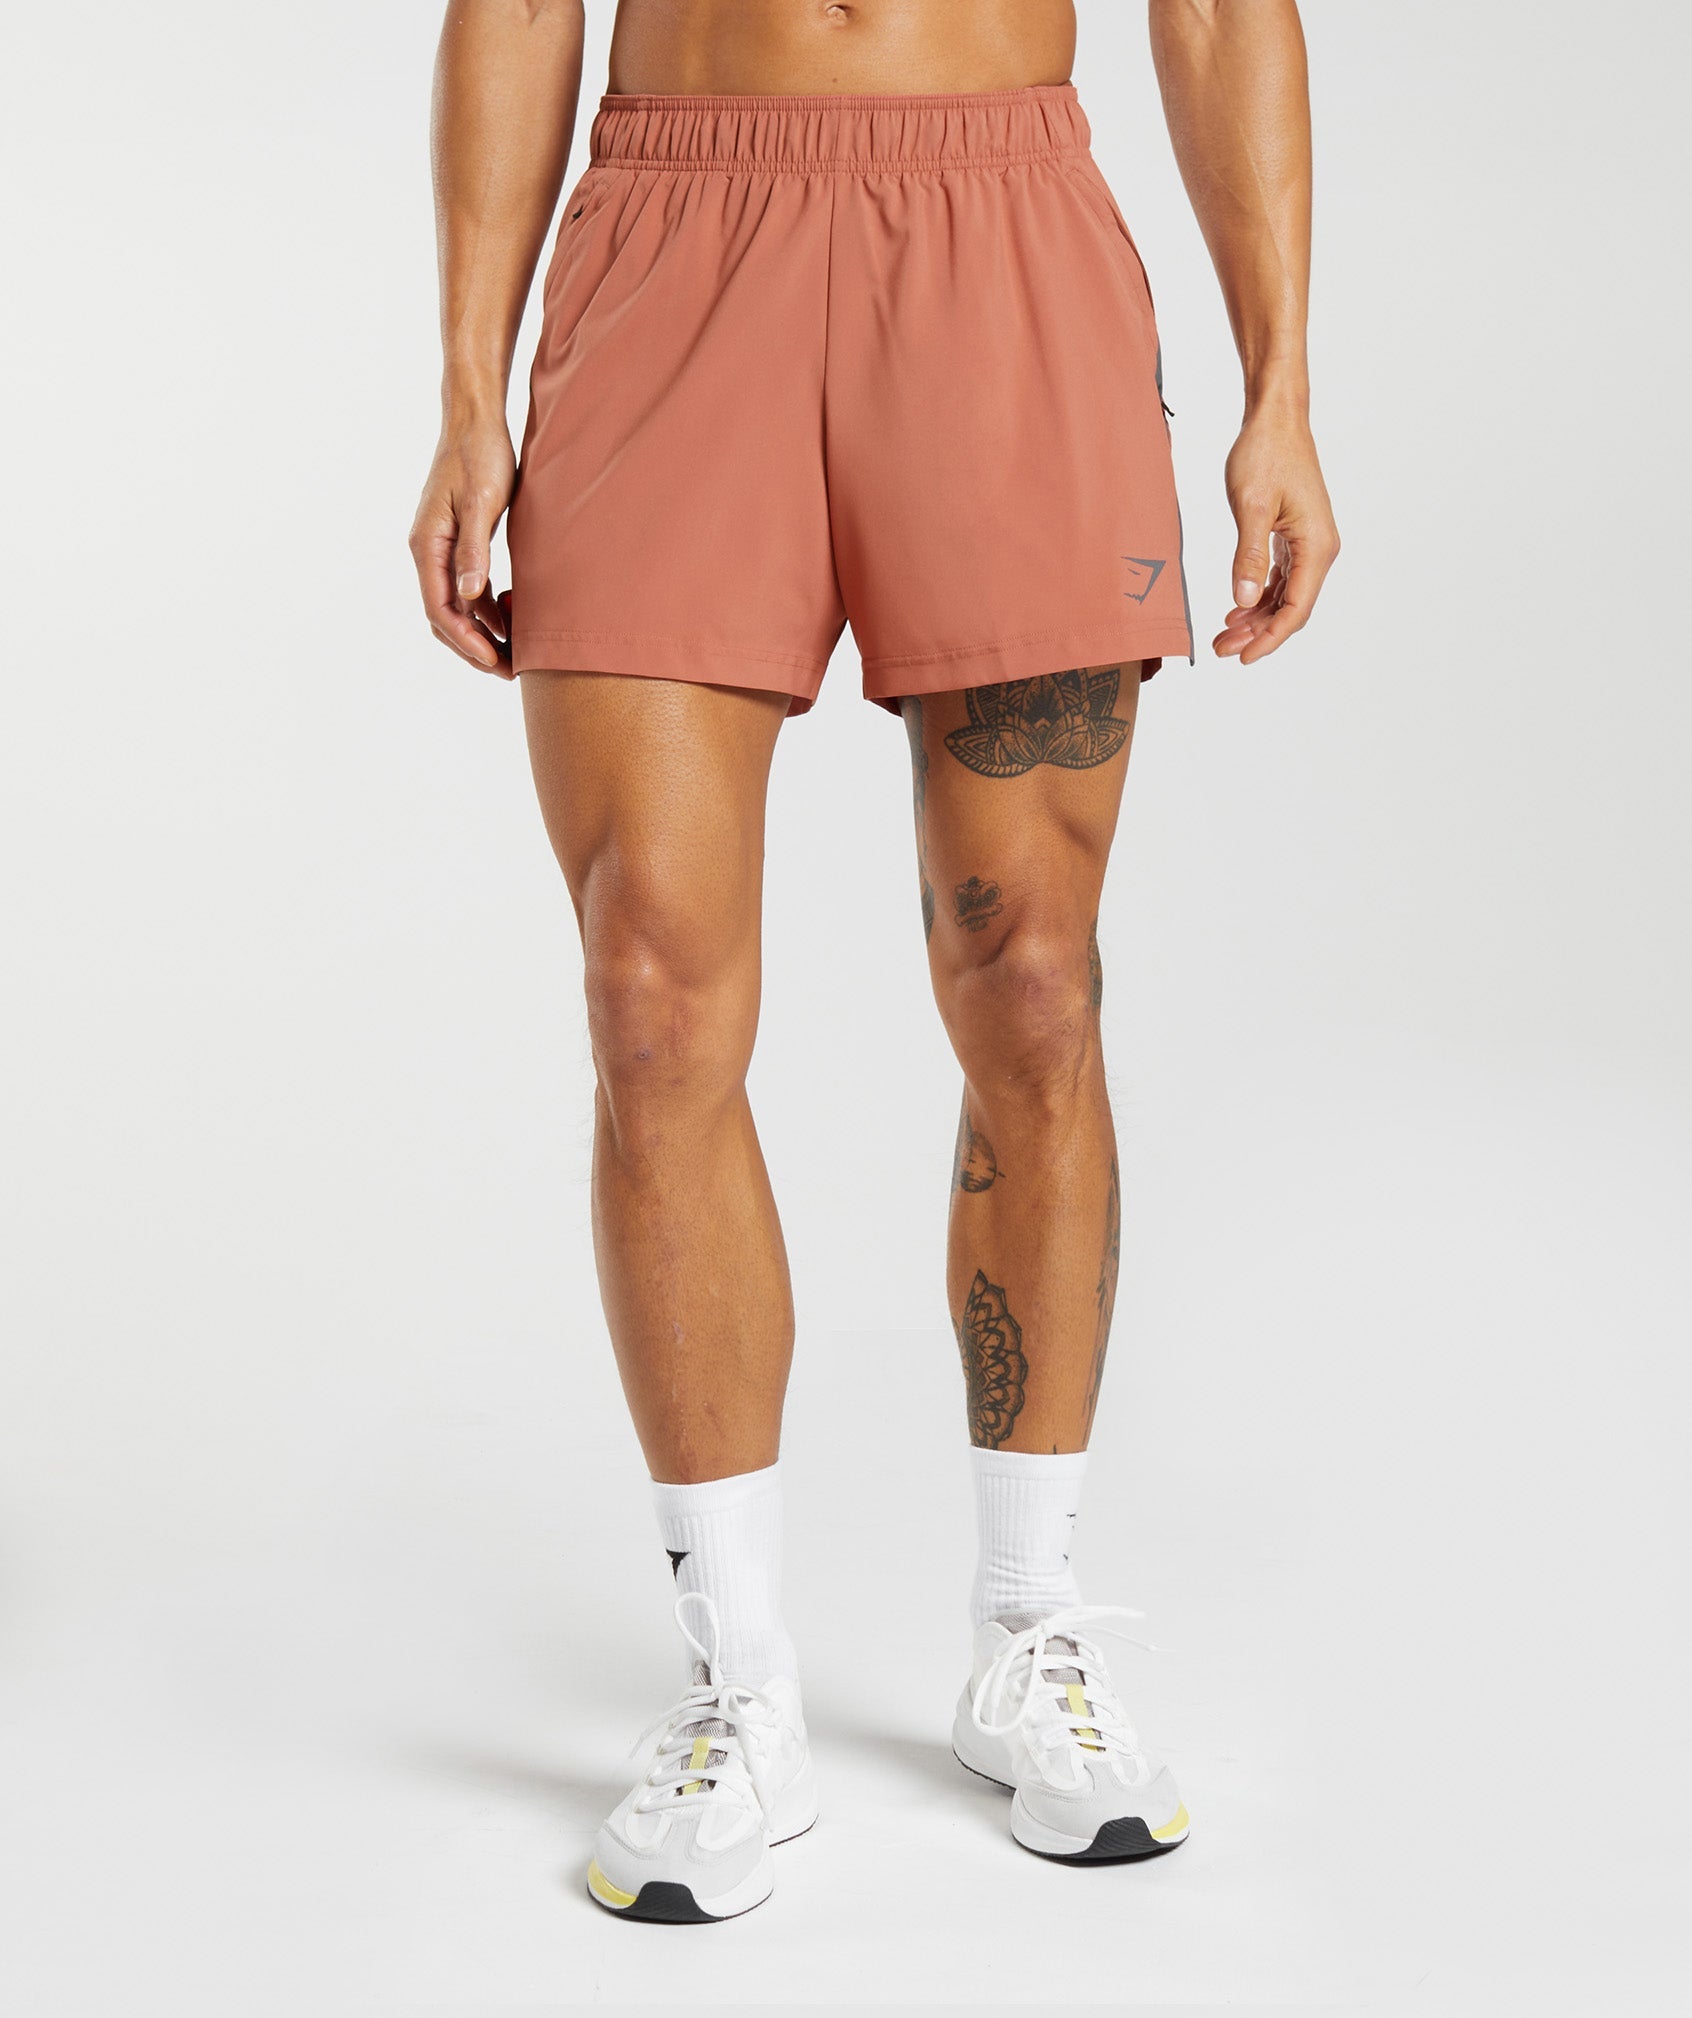 Sport 5" Shorts in Persimmon Red/Silhouette Grey